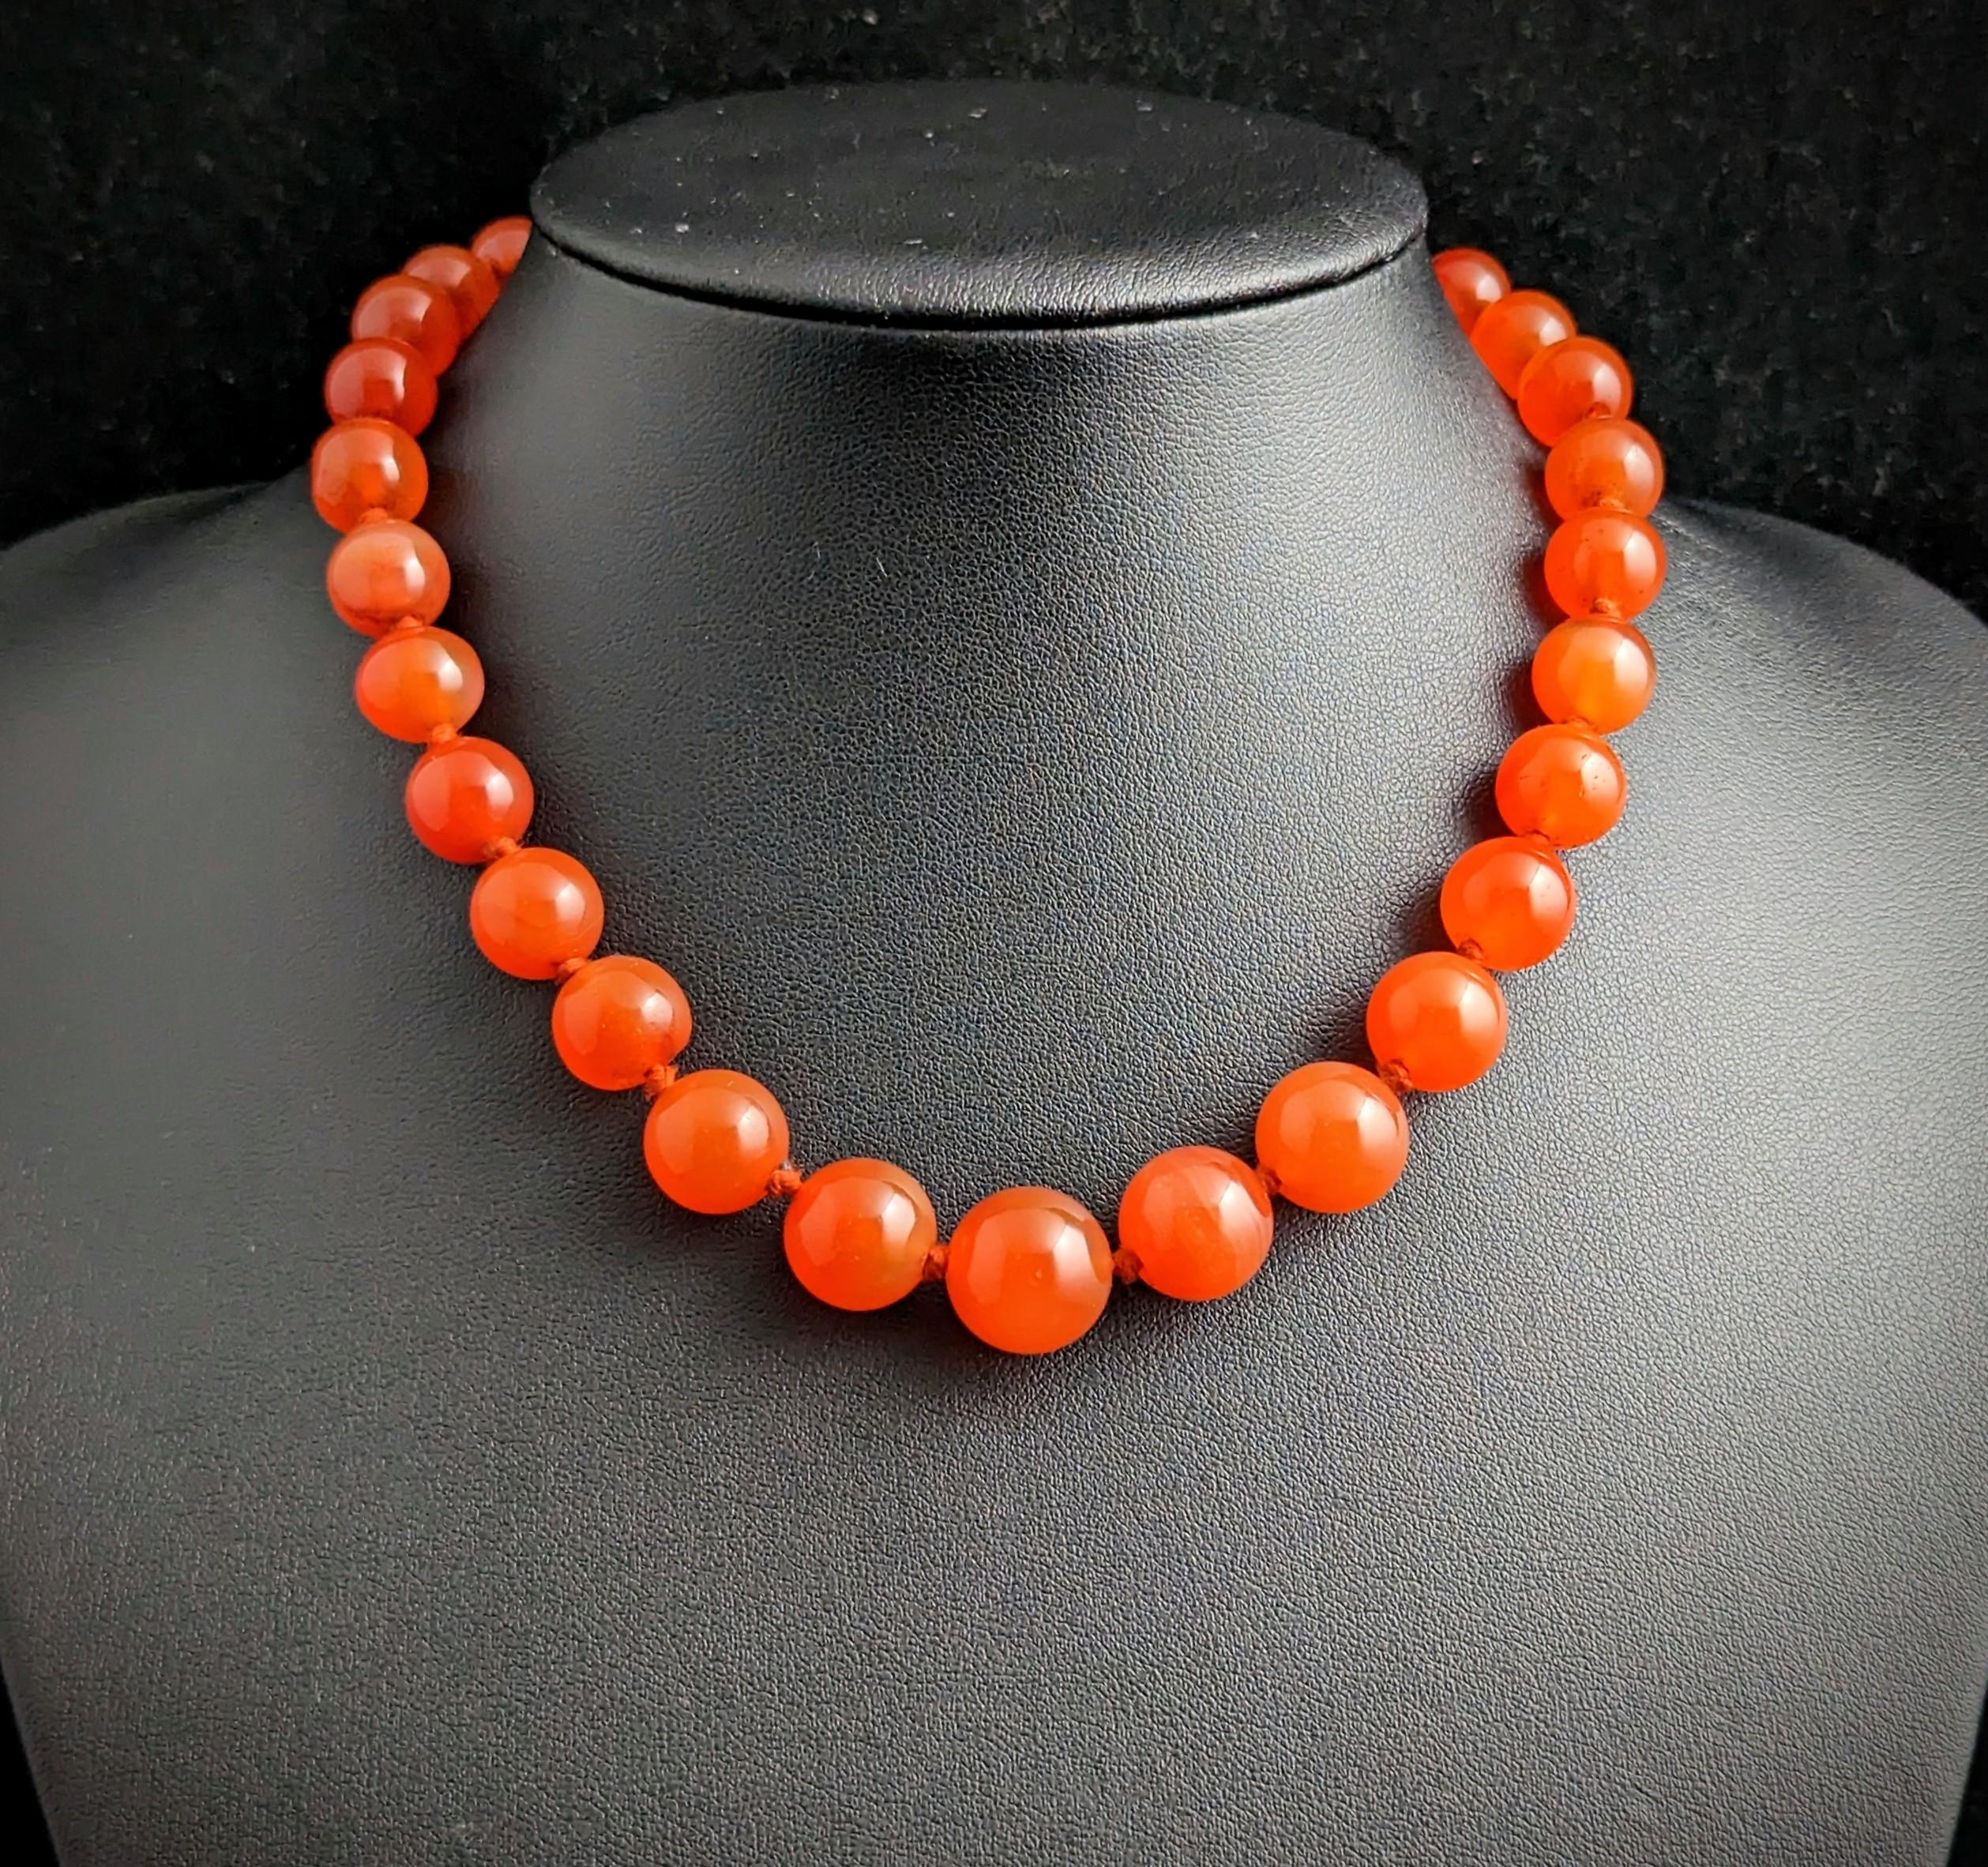 This antique Victorian era Carnelian bead necklace is so gorgeous and chunky.

Big, bold Carnelian beads, graduating in size, in a rich orangey red with light coloured streaks ranging from clear to Orange hues.

The beads have been hand knotted onto